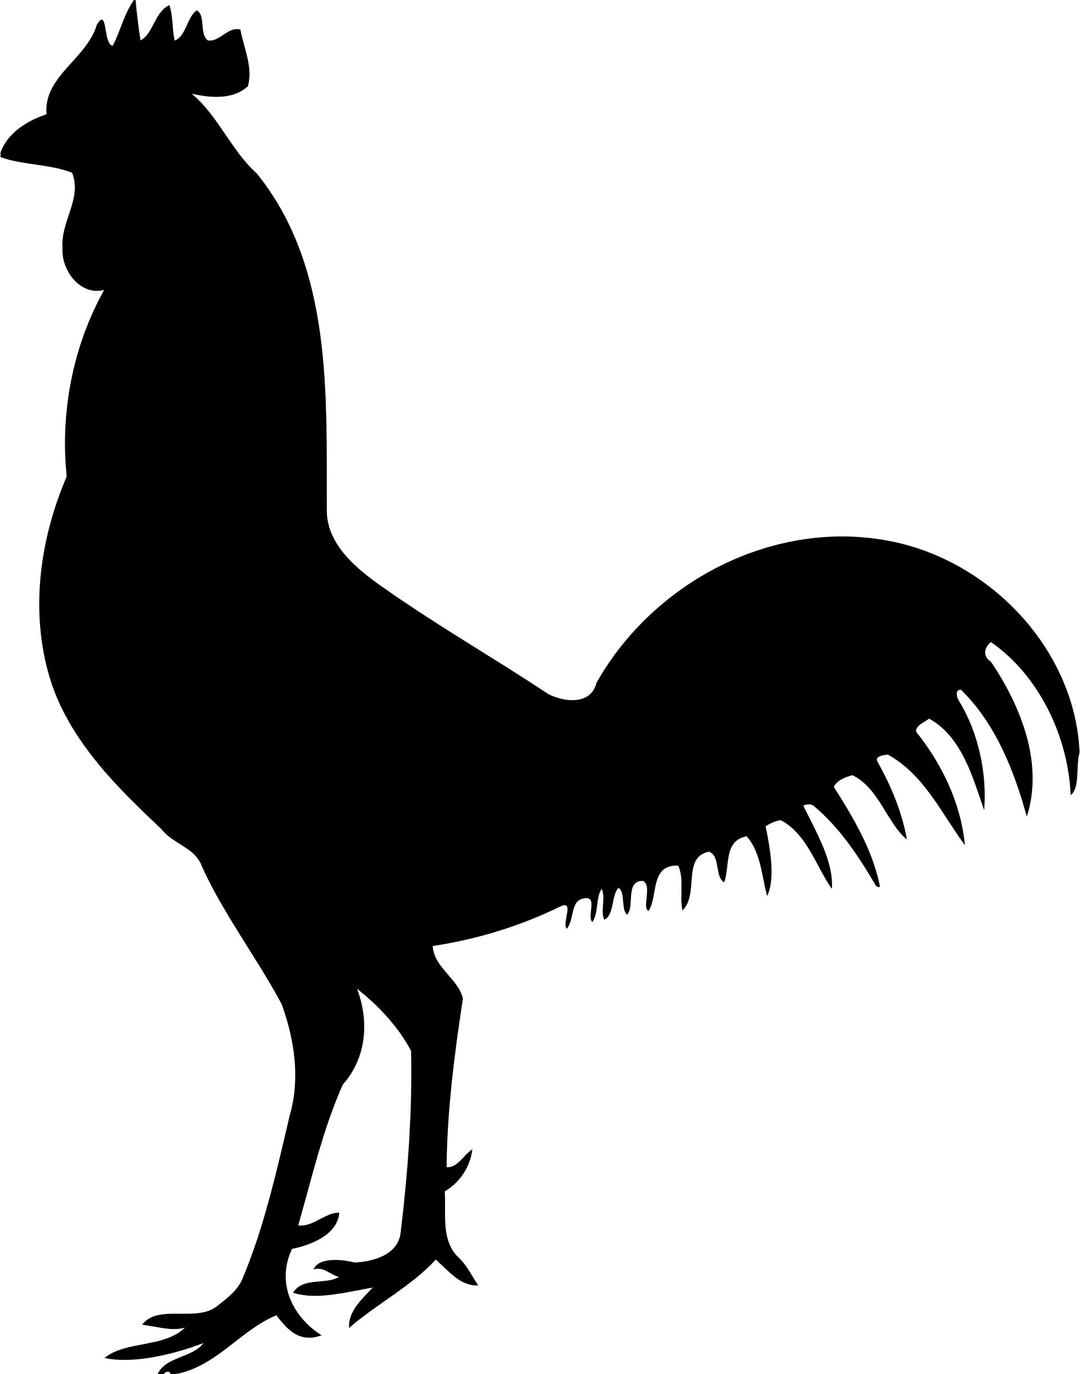 Cock silhouette png transparent